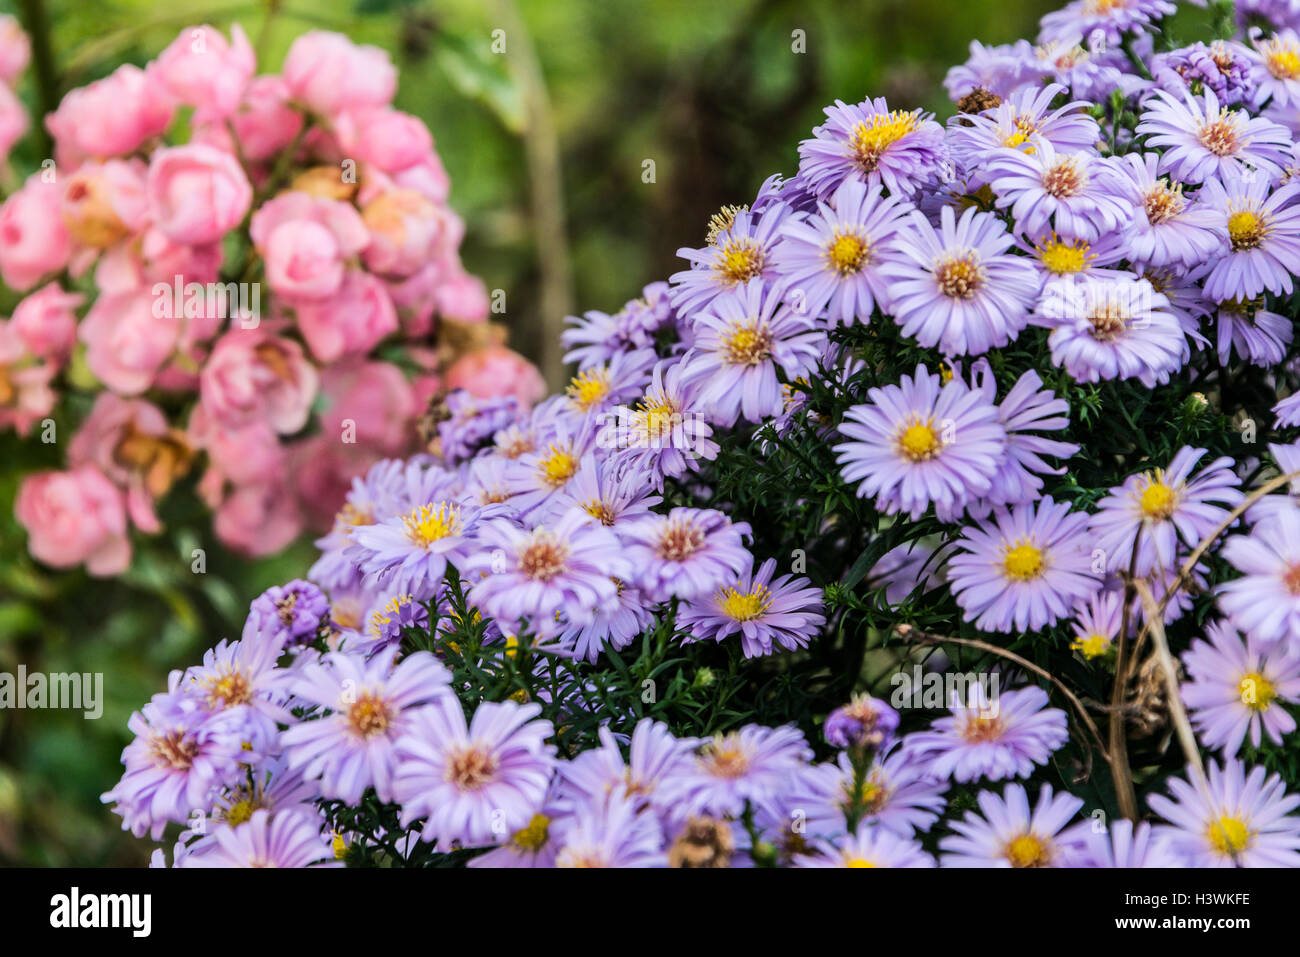 A michaelmas daisy with a fairy rose in the background Stock Photo